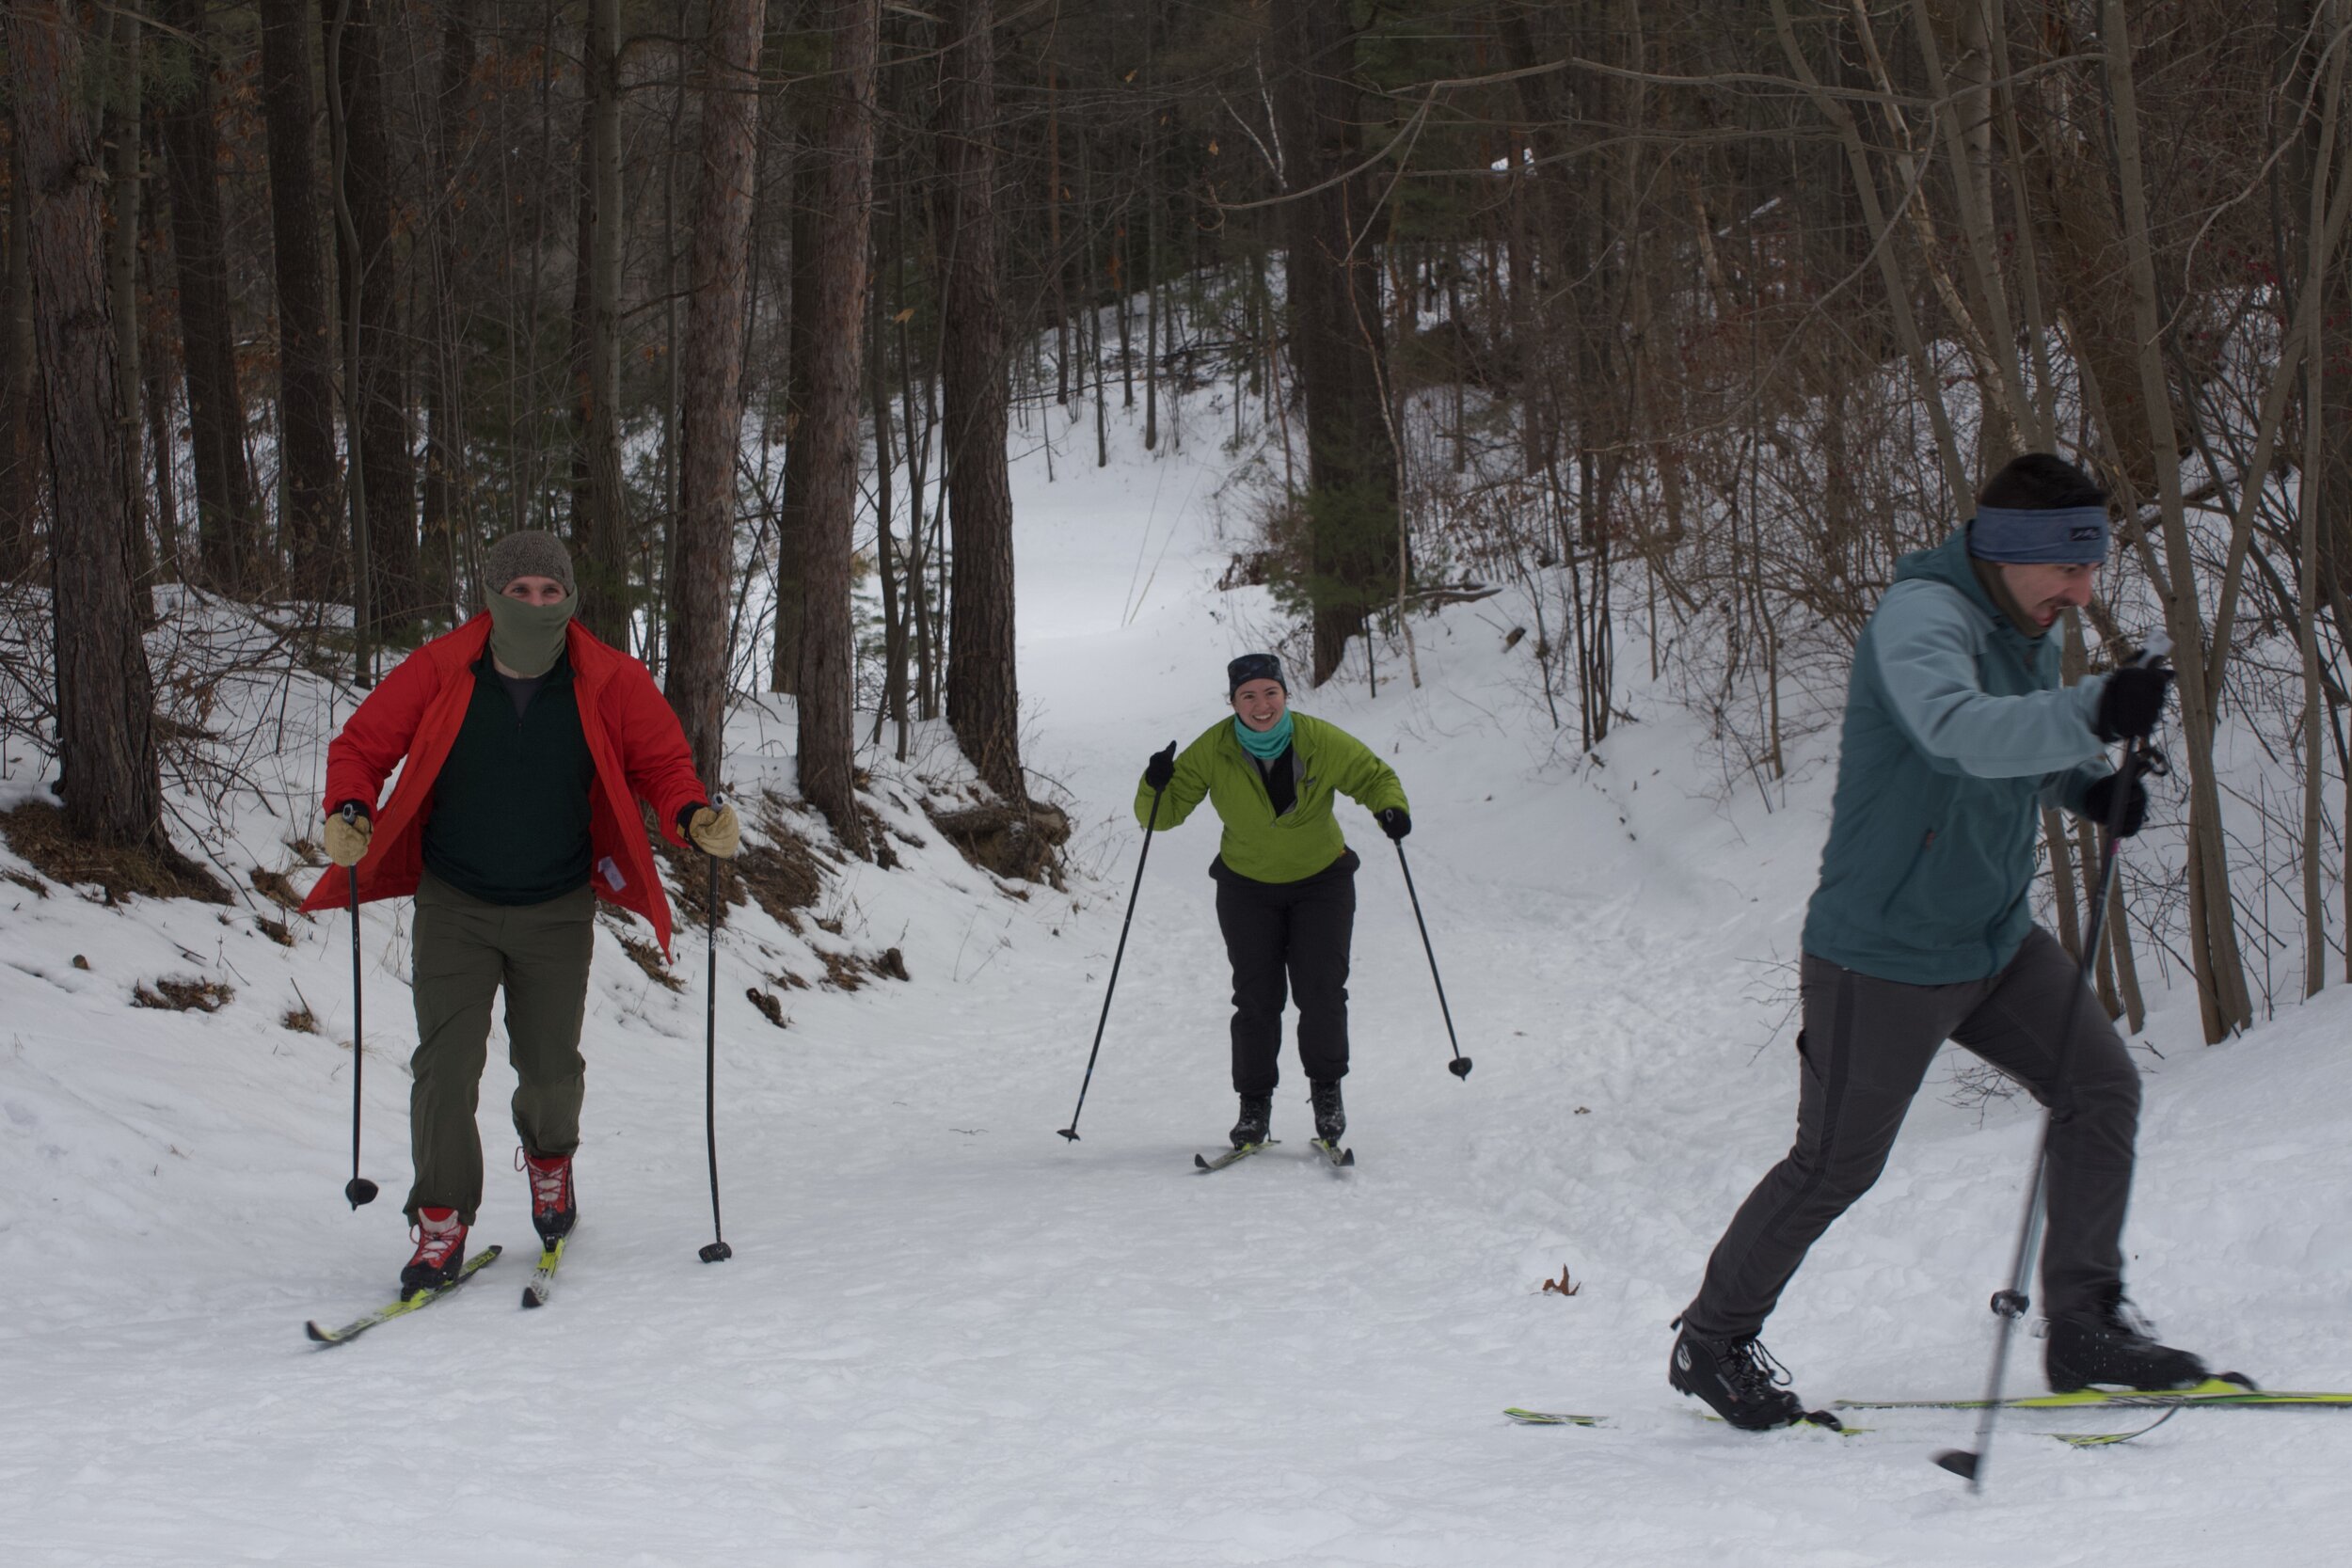   Friends compete to see who can get up the hill the fastest, and look like they’re having a great time!  